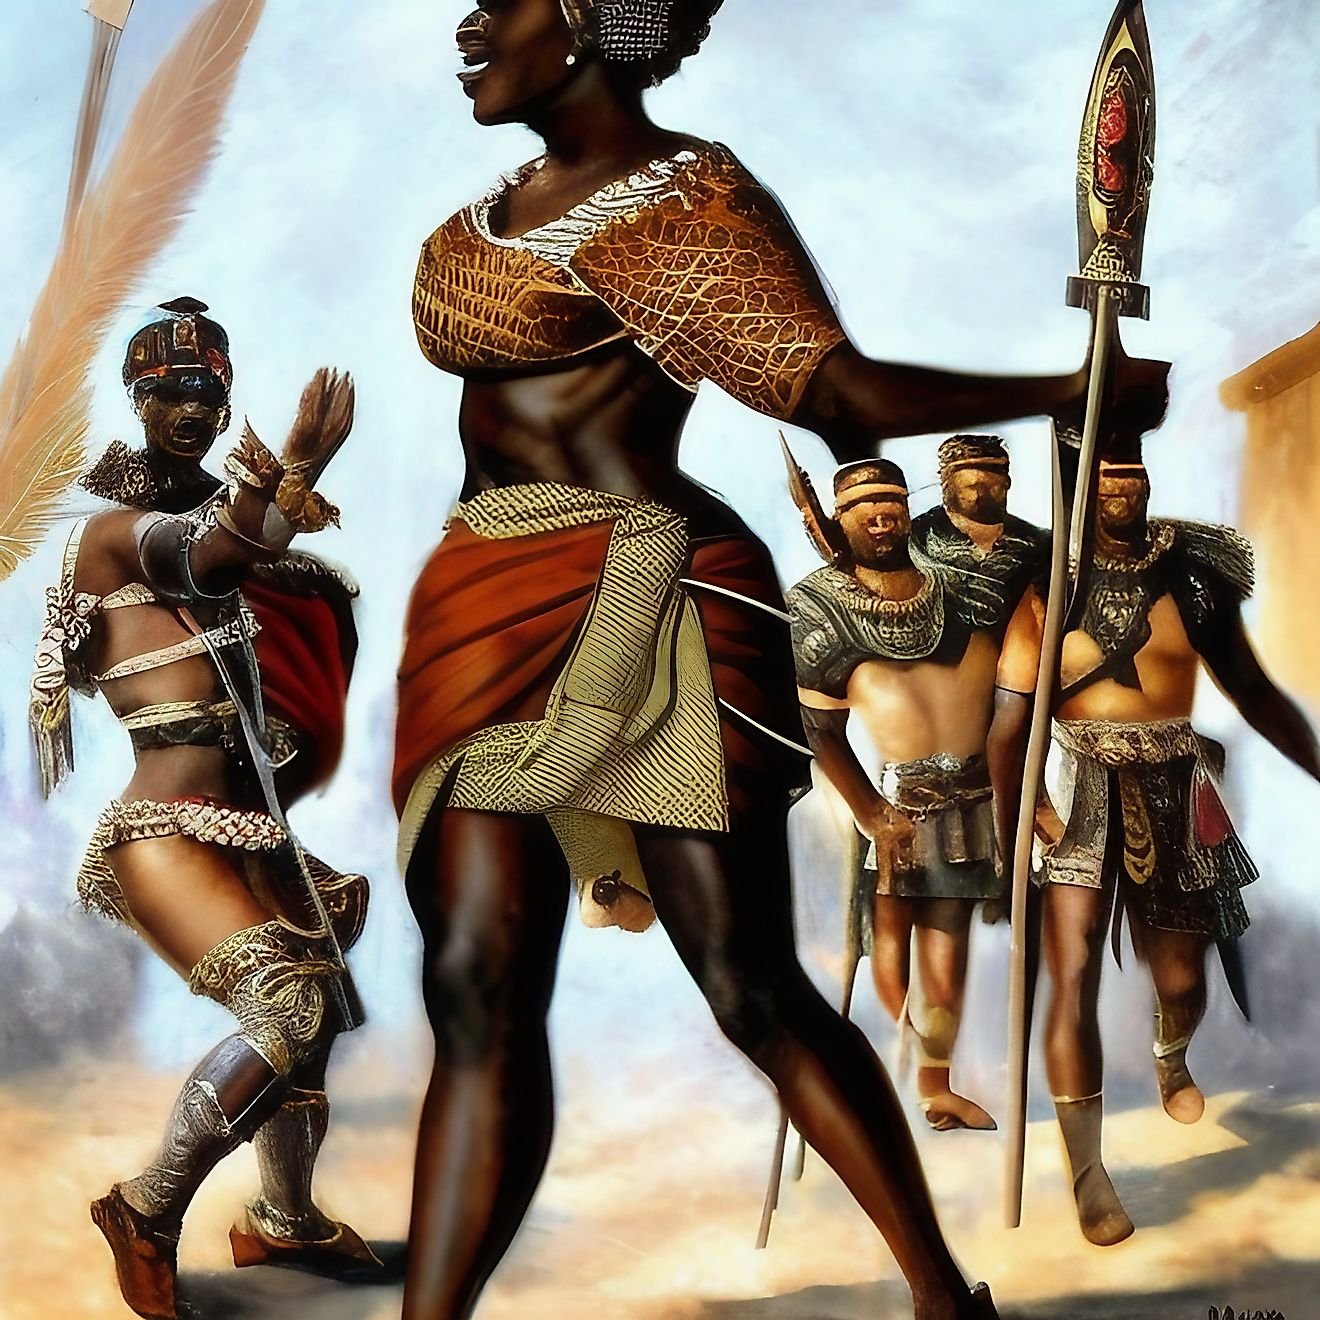 The One-Eyed African Queen Who Defeated the Great Roman Empire